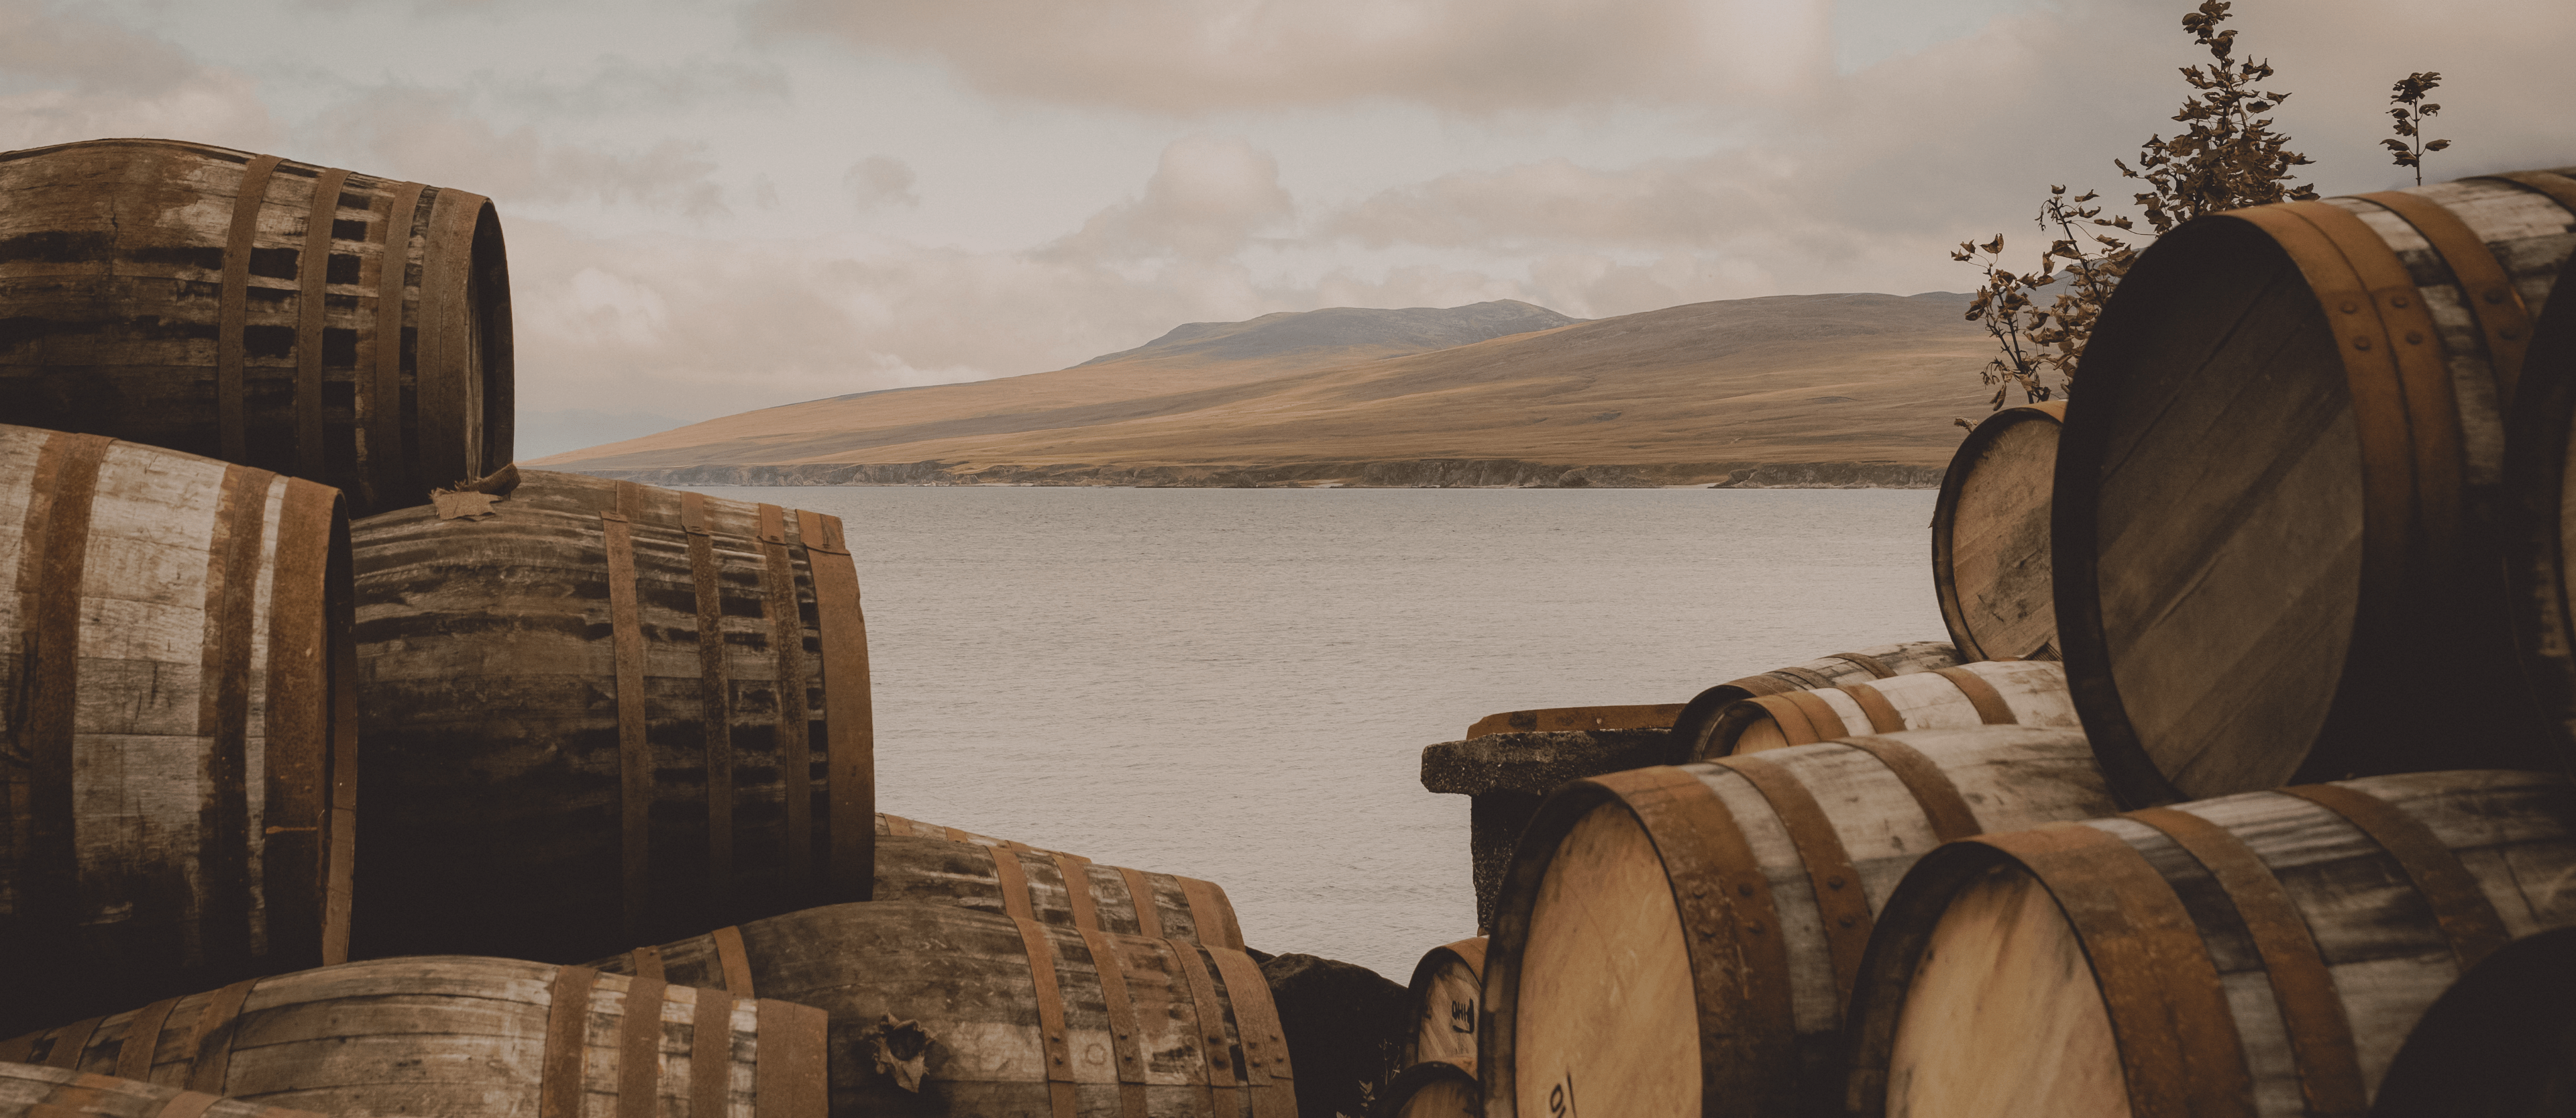 Barrels stacked up in the foreground of a lake and mountains in the back